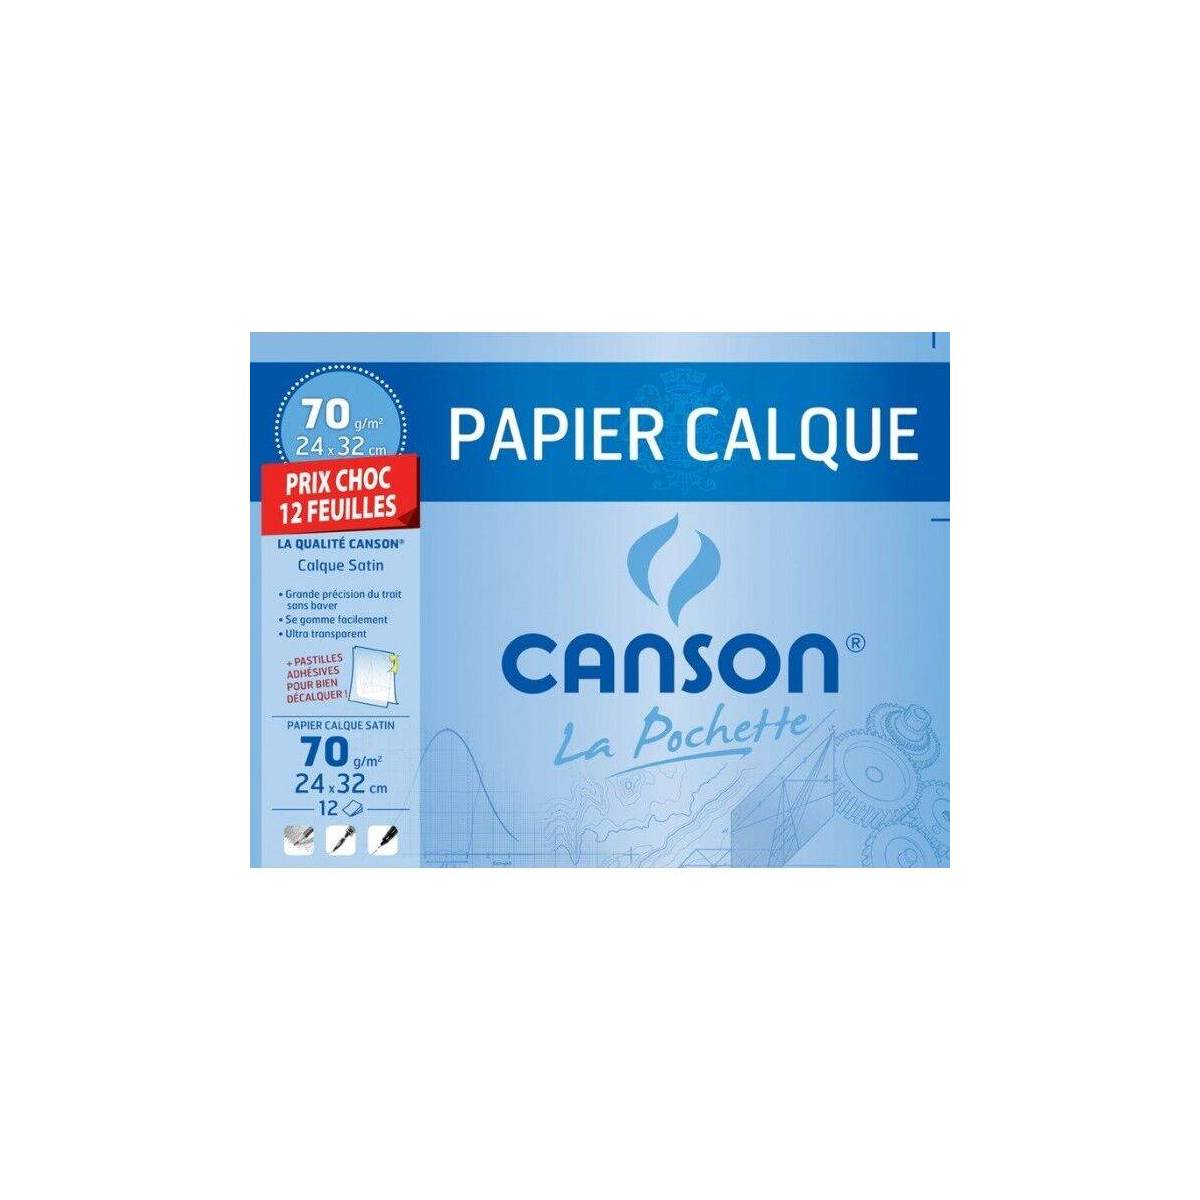 Canson Tracing Paper 12 24 x 32 cm Sheets